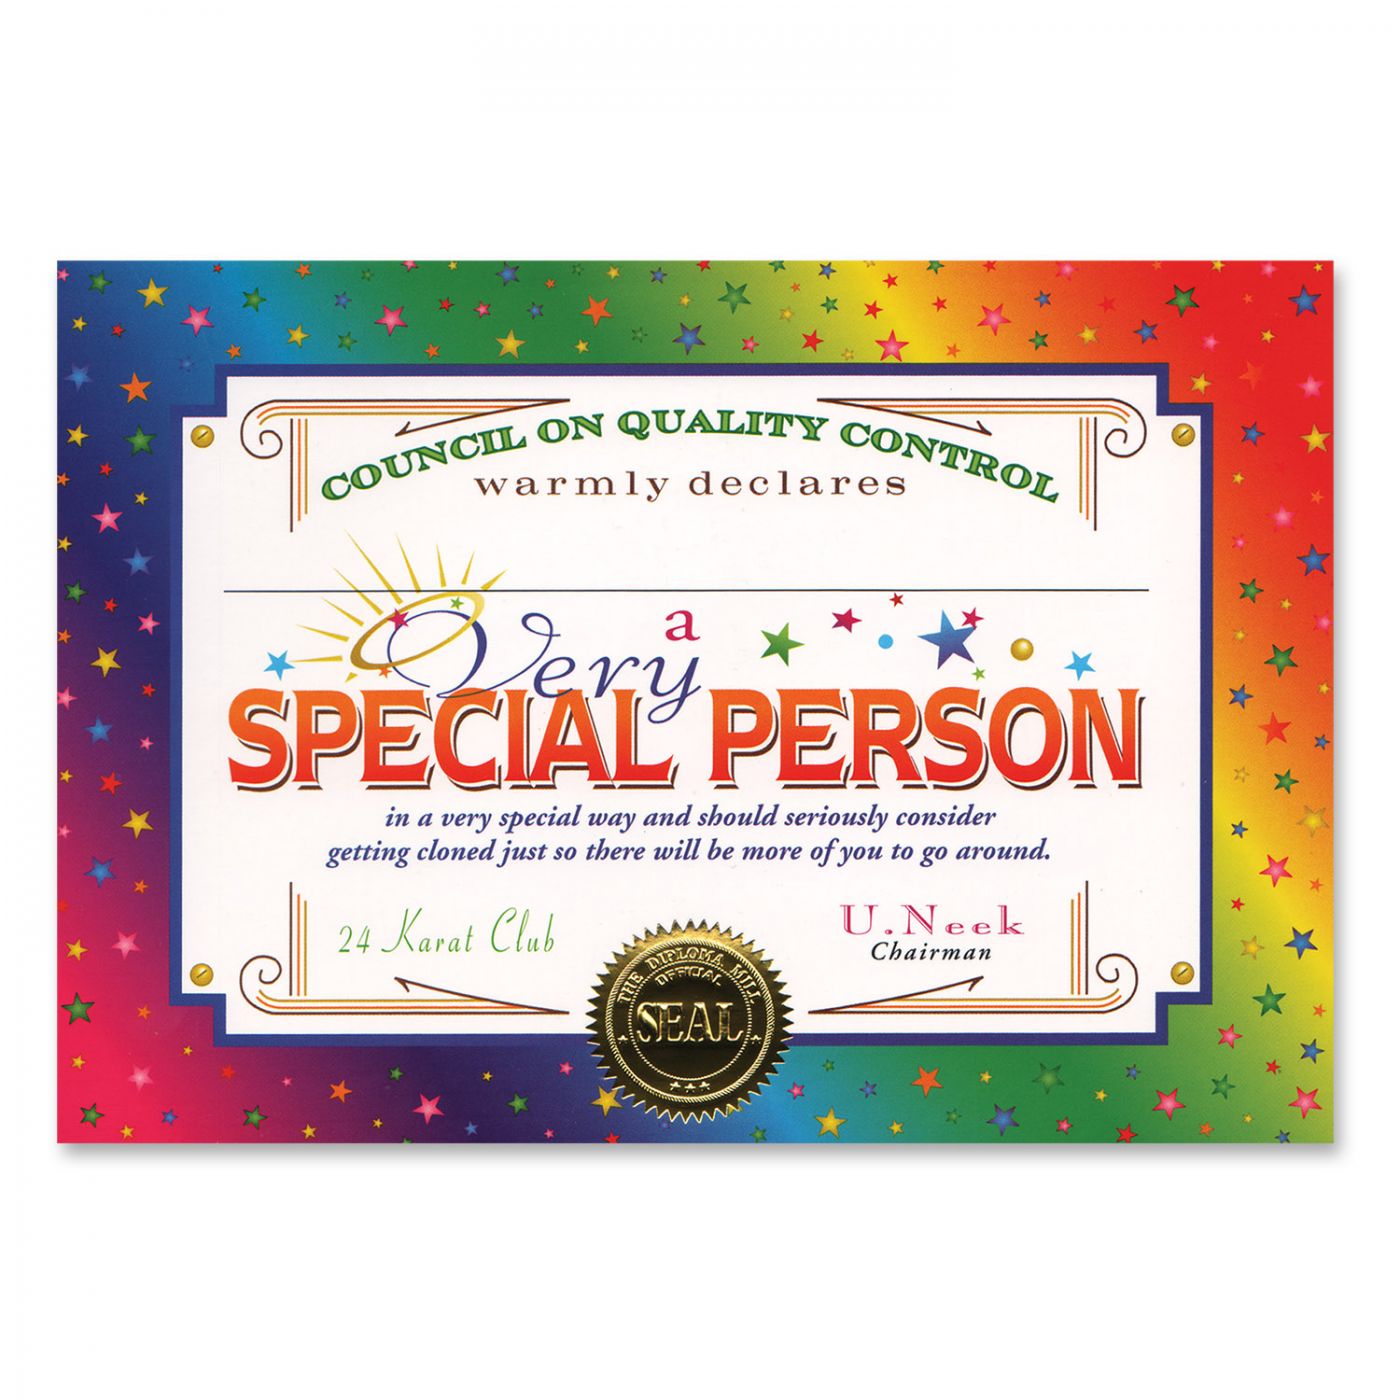 Very Special Person Certificate (6) image